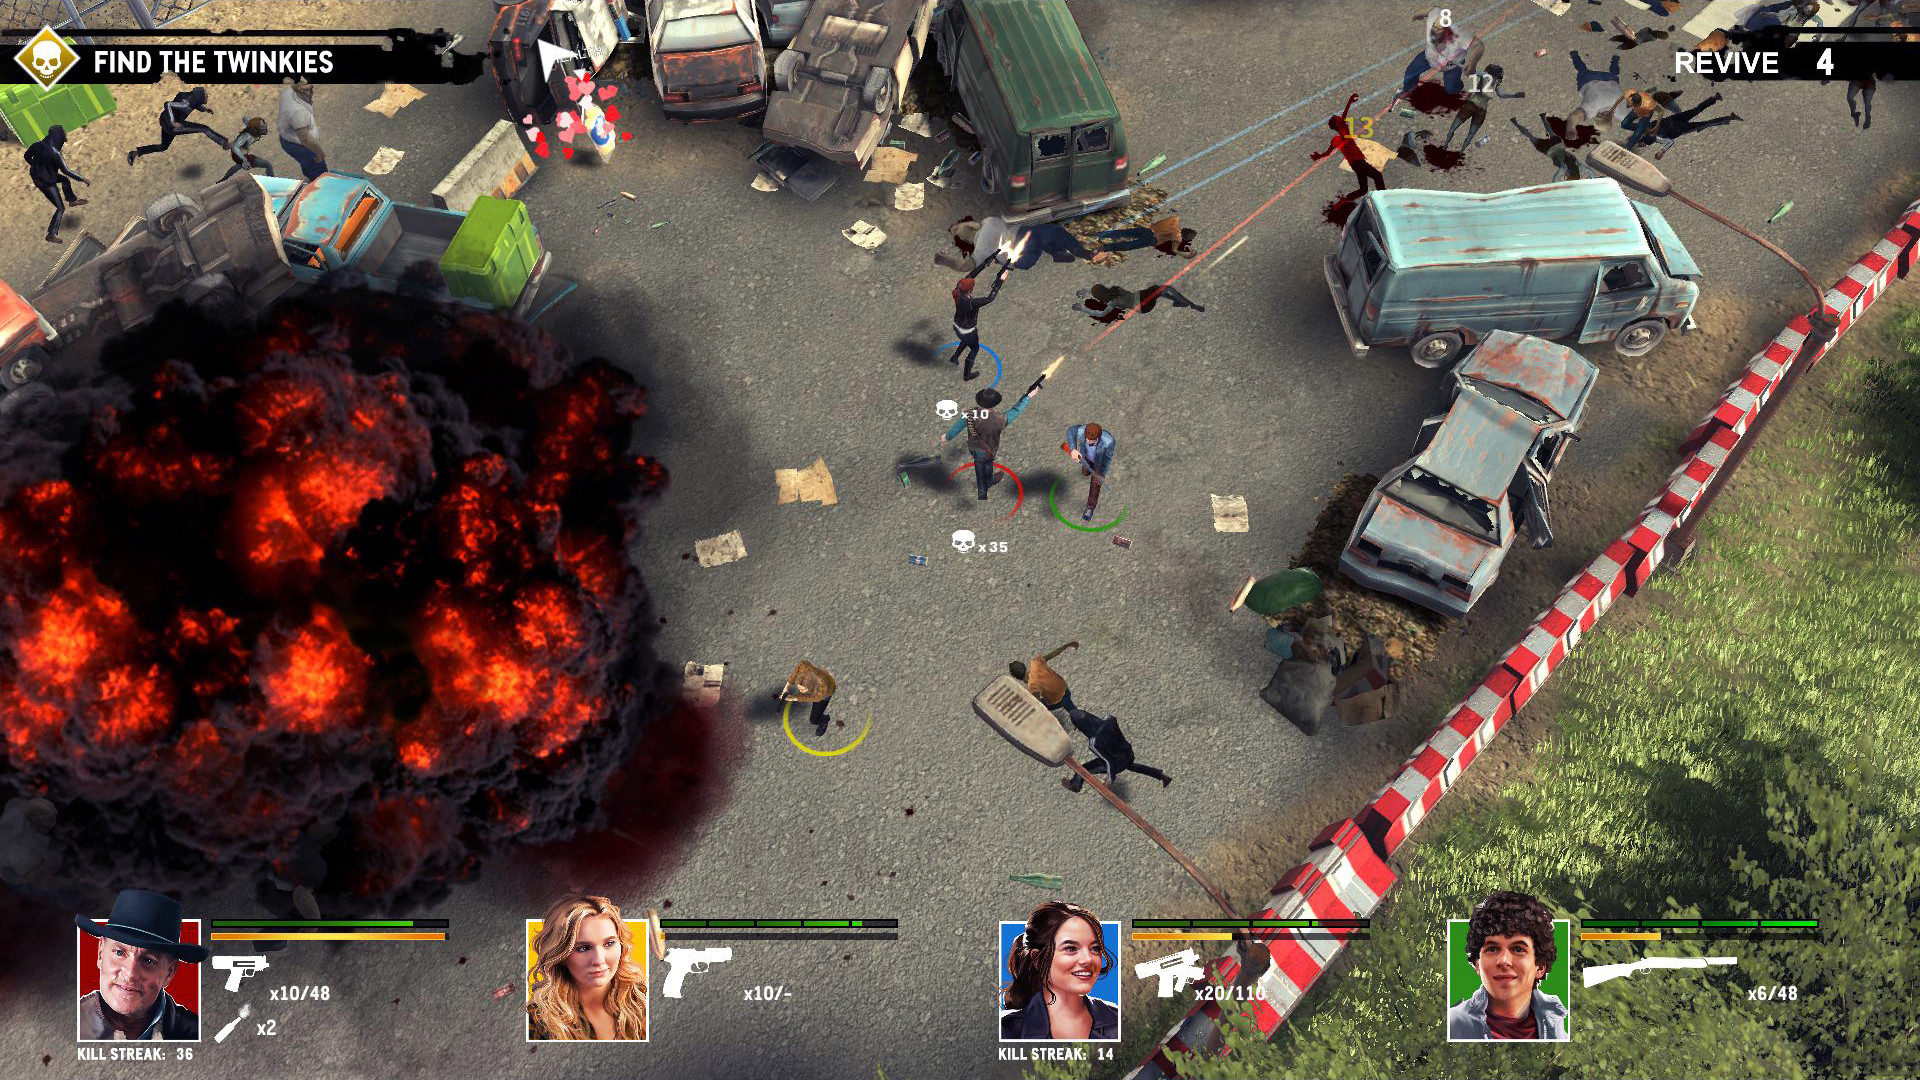 Save 90% on Zombieland: Double Tap - Road Trip on Steam